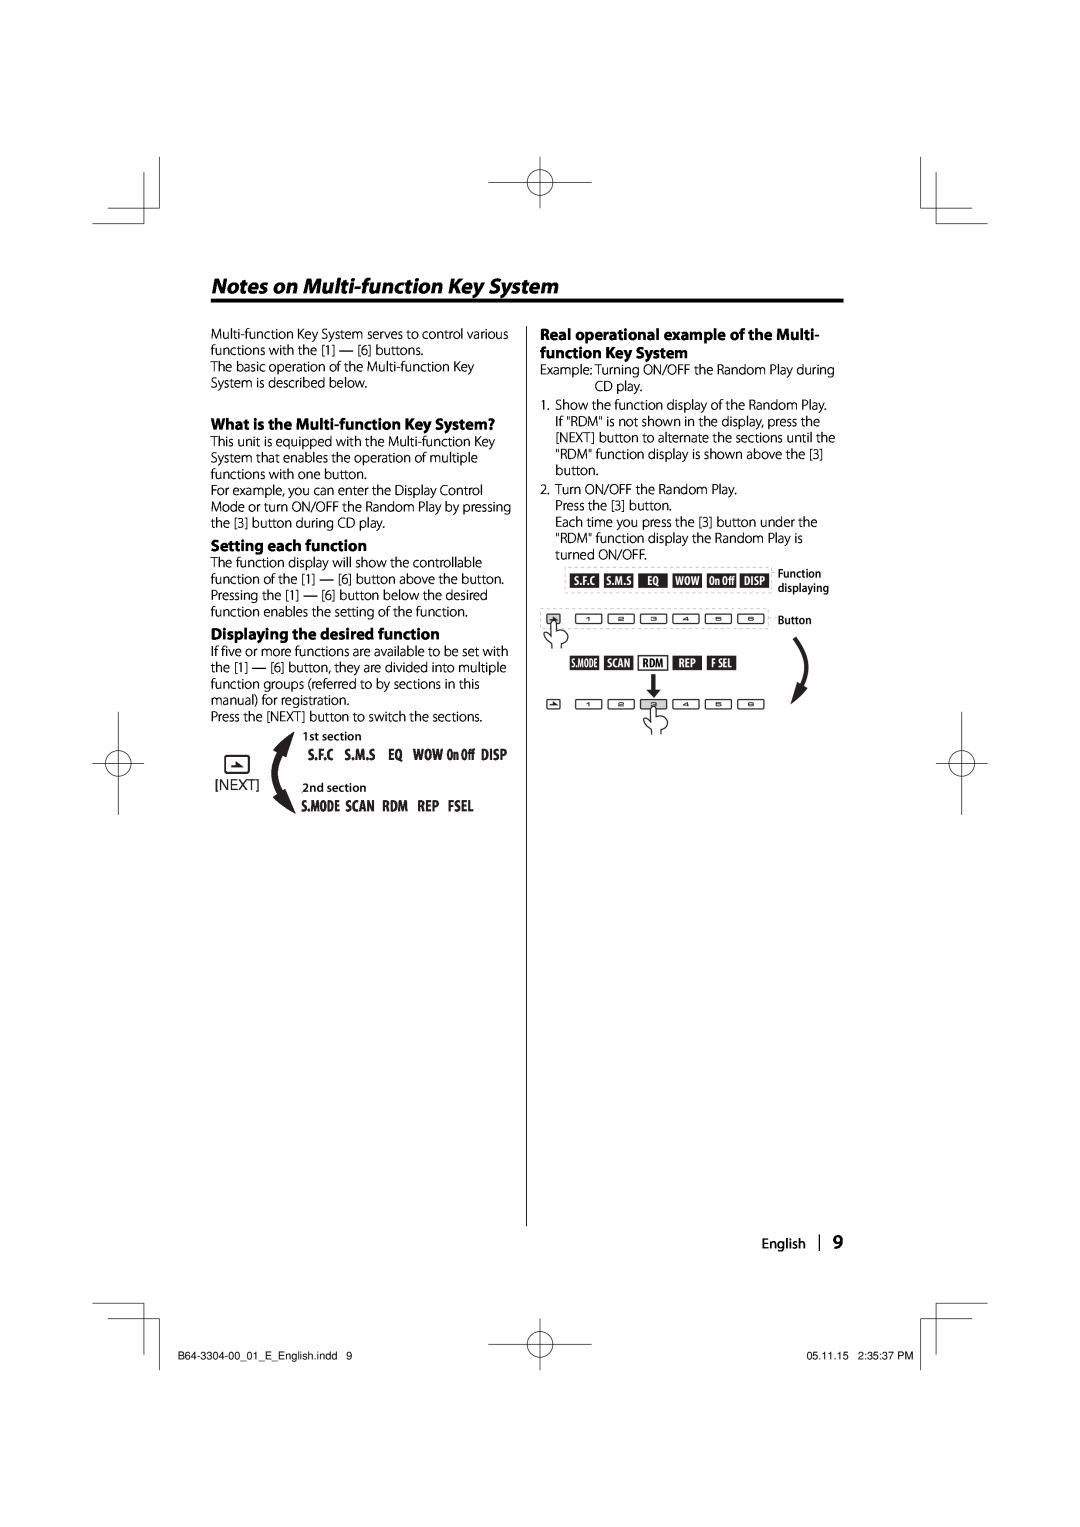 Dolby Laboratories KDC-W8534 instruction manual Notes on Multi-function Key System, What is the Multi-function Key System? 